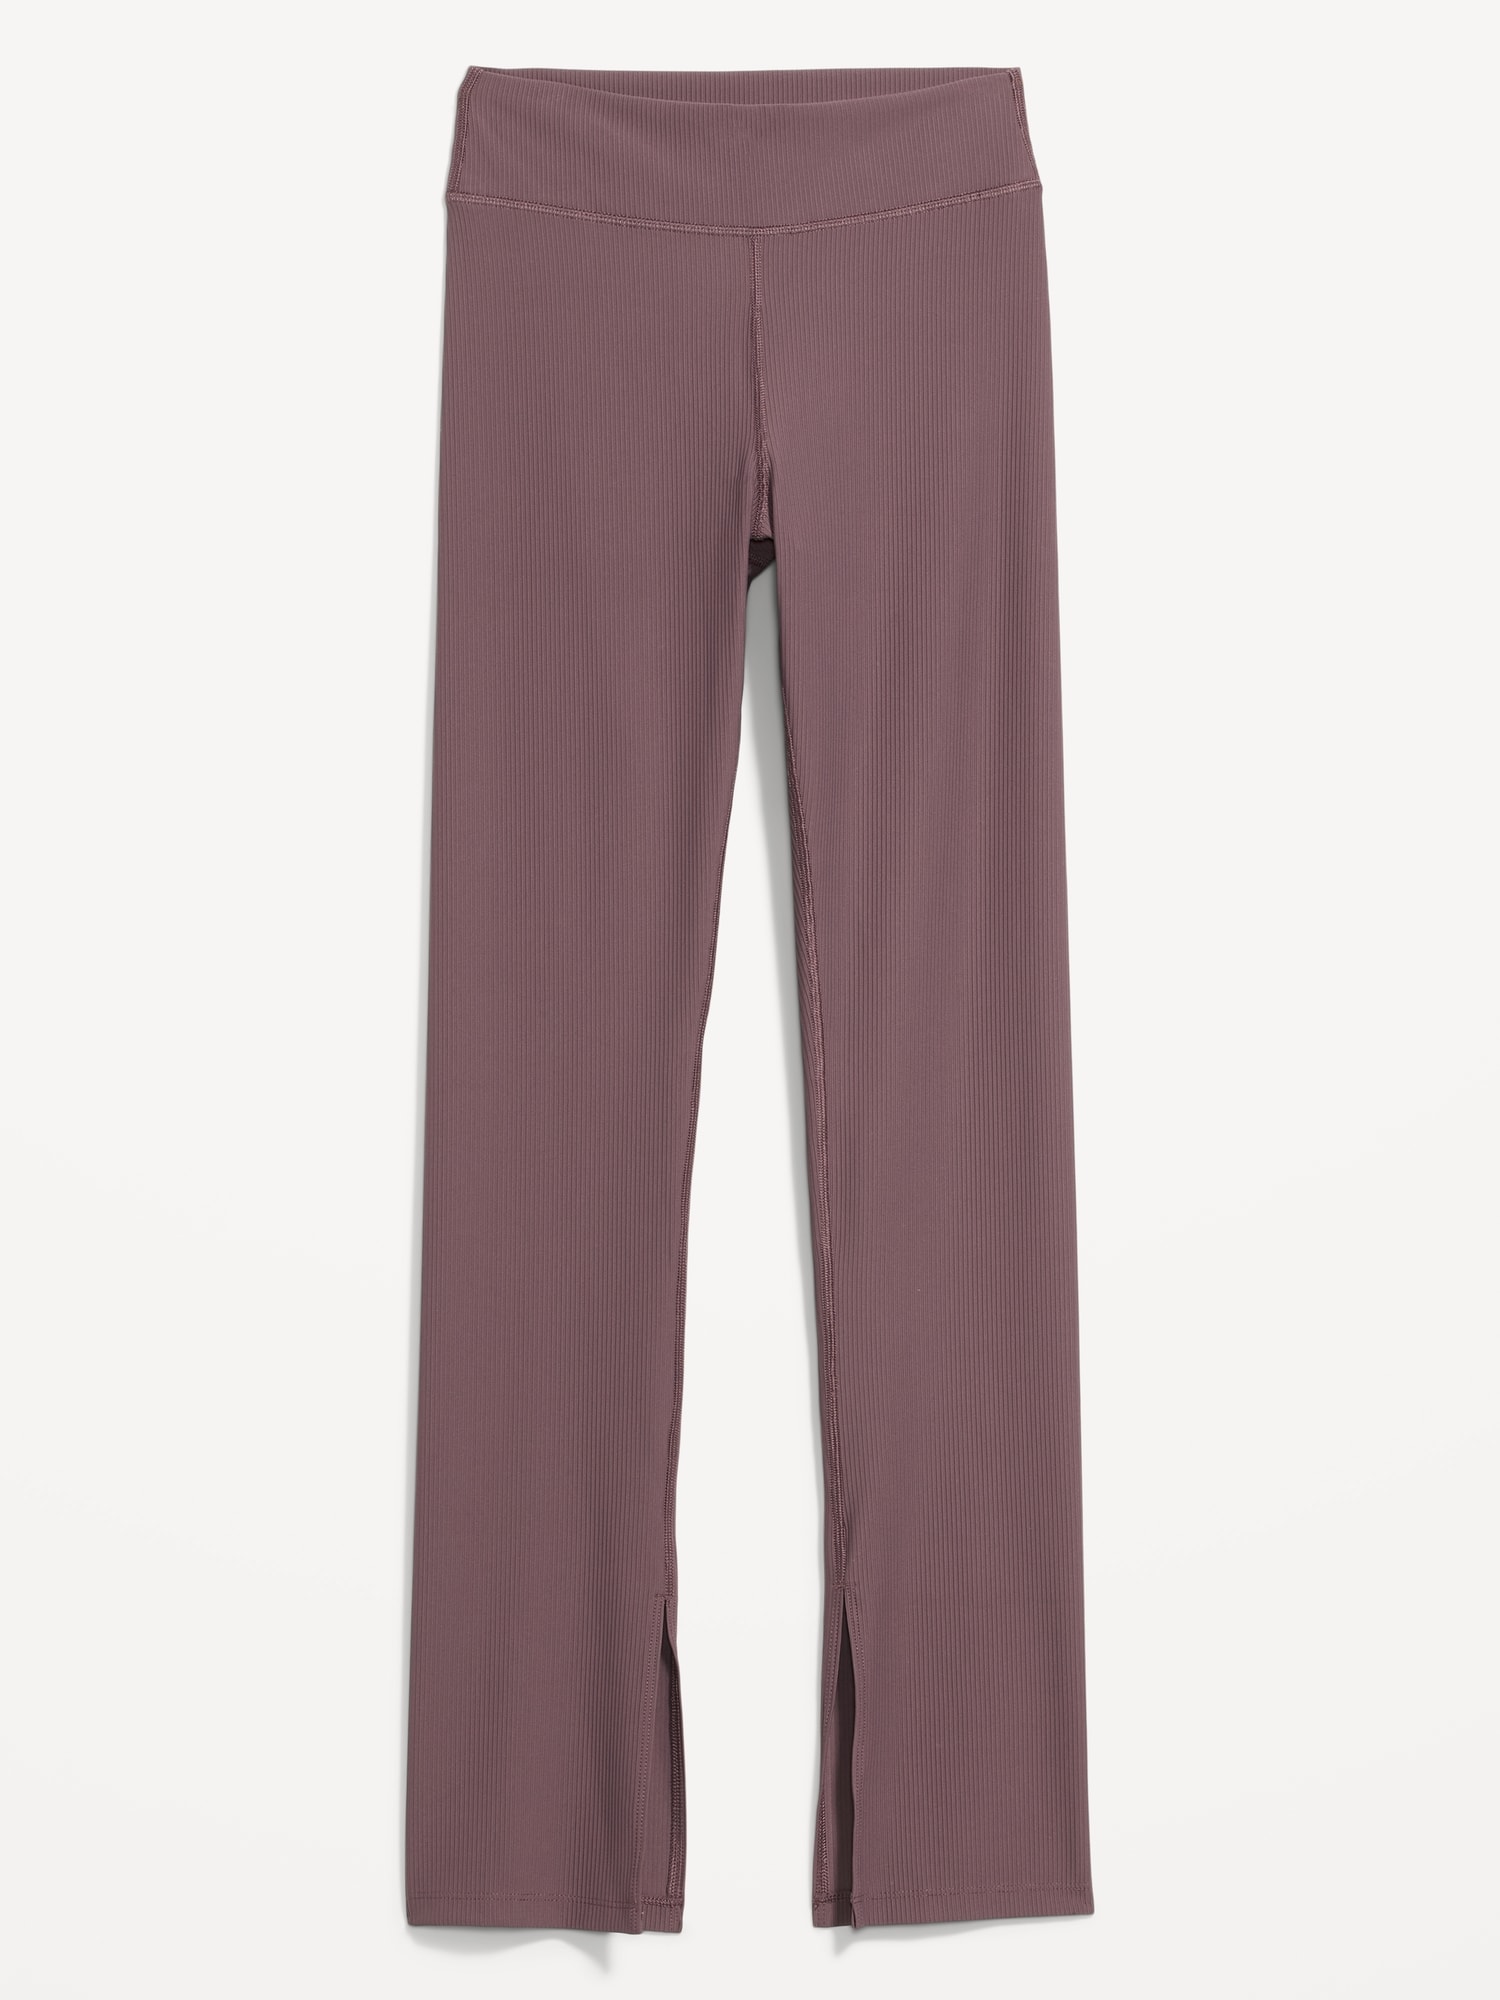 Old Navy High Waisted Cropped Flare Leggings for Women